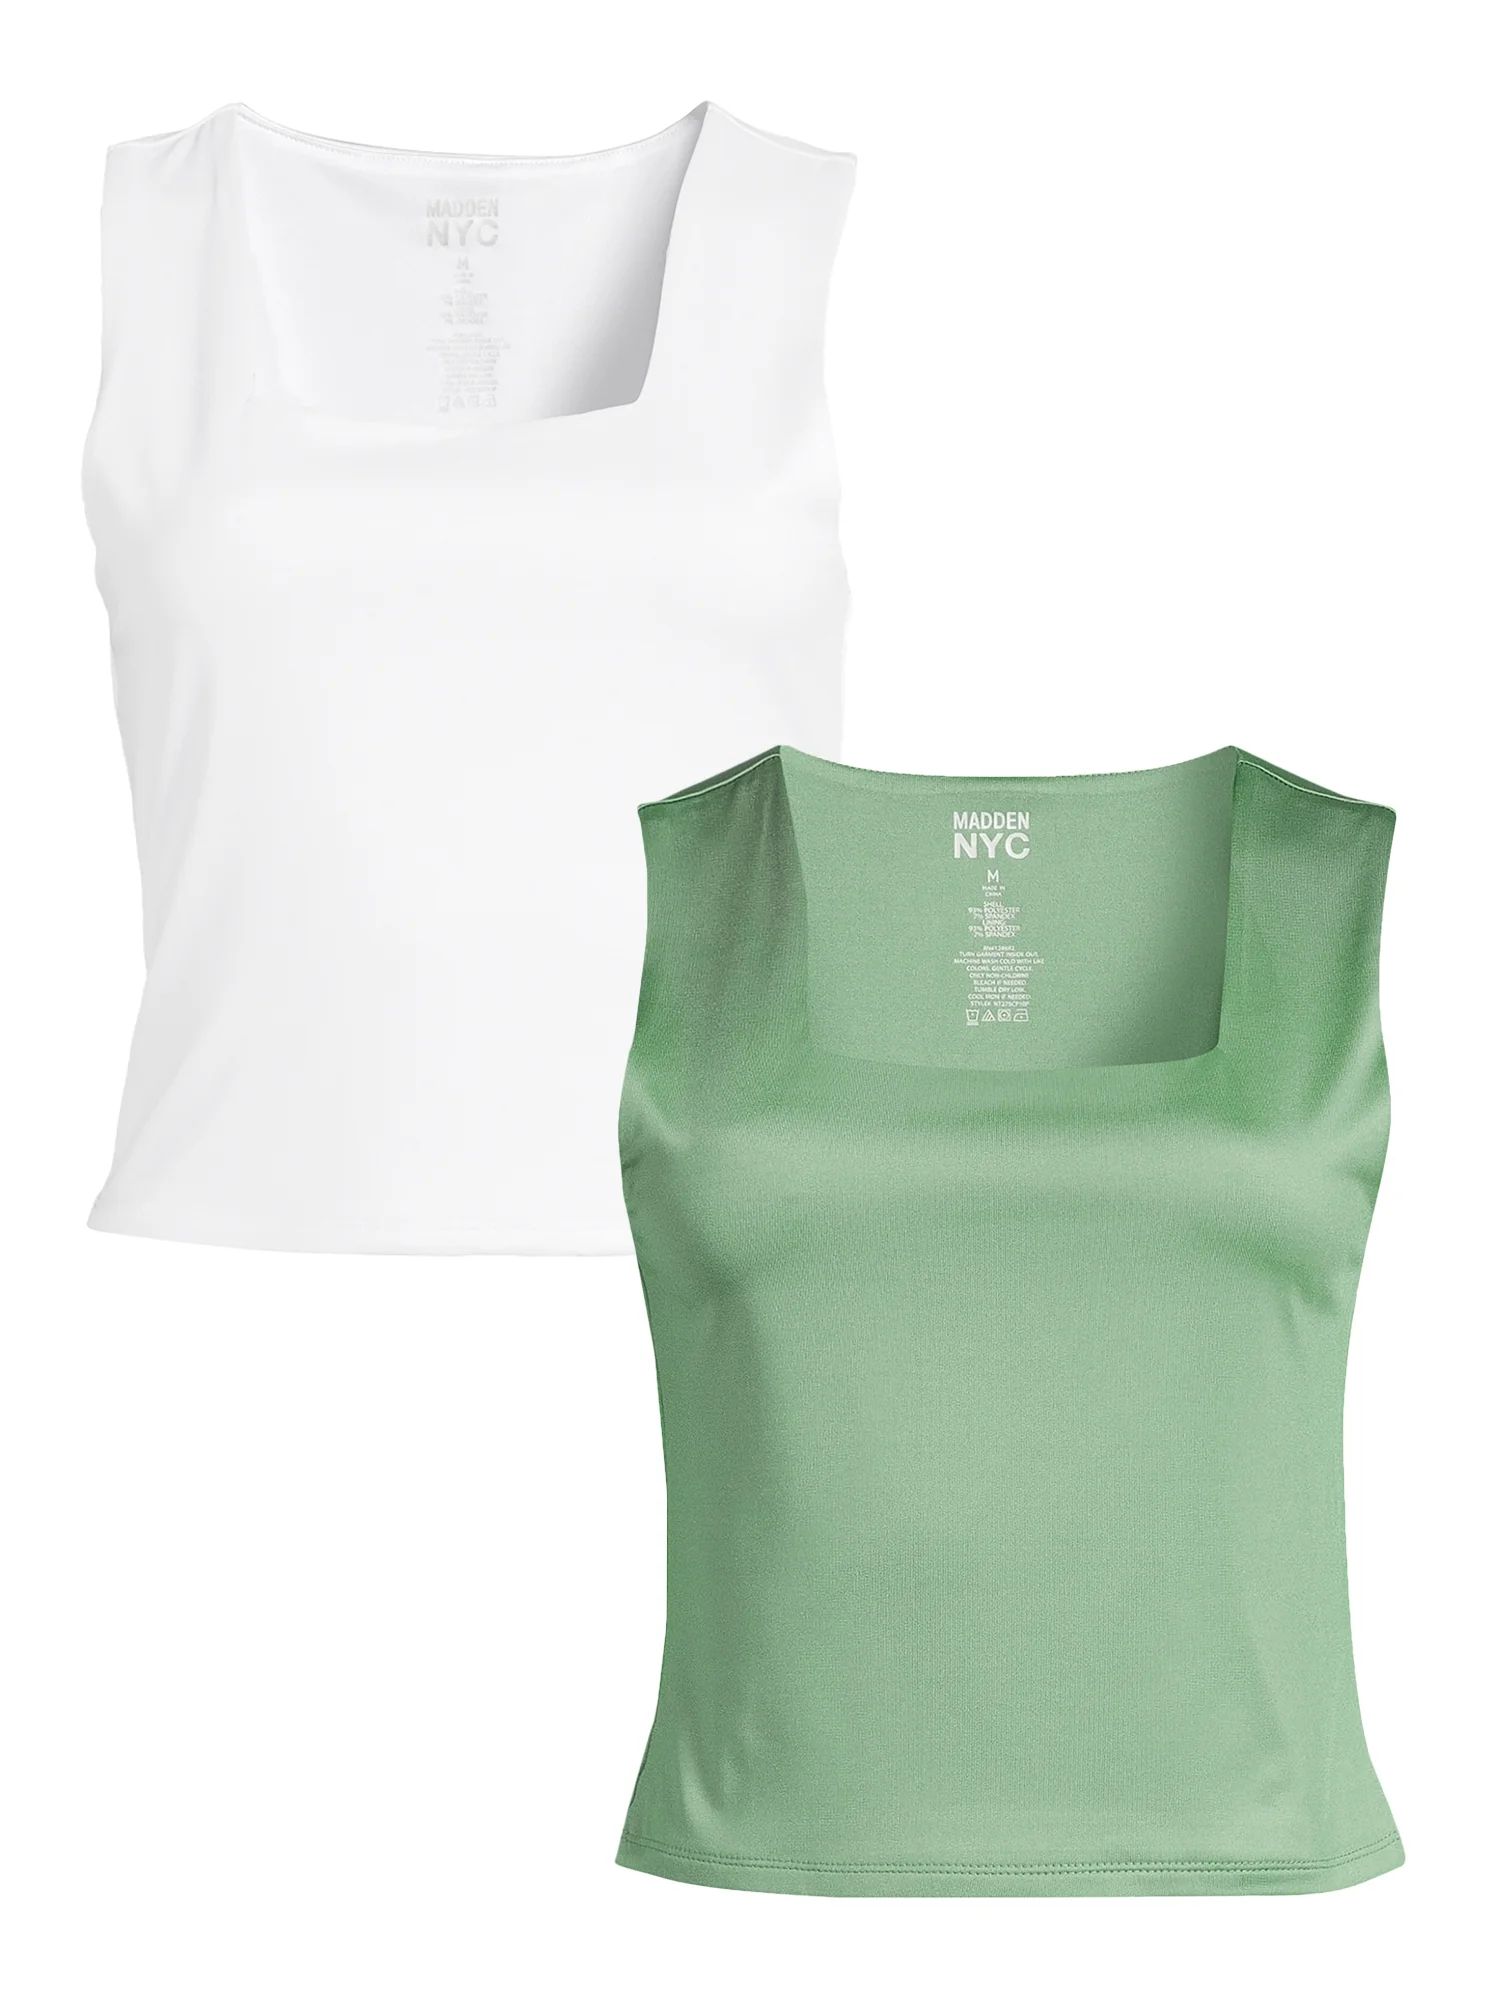 Madden NYC Juniors Square Neck Tank Top, 2 Pack | Walmart (US)